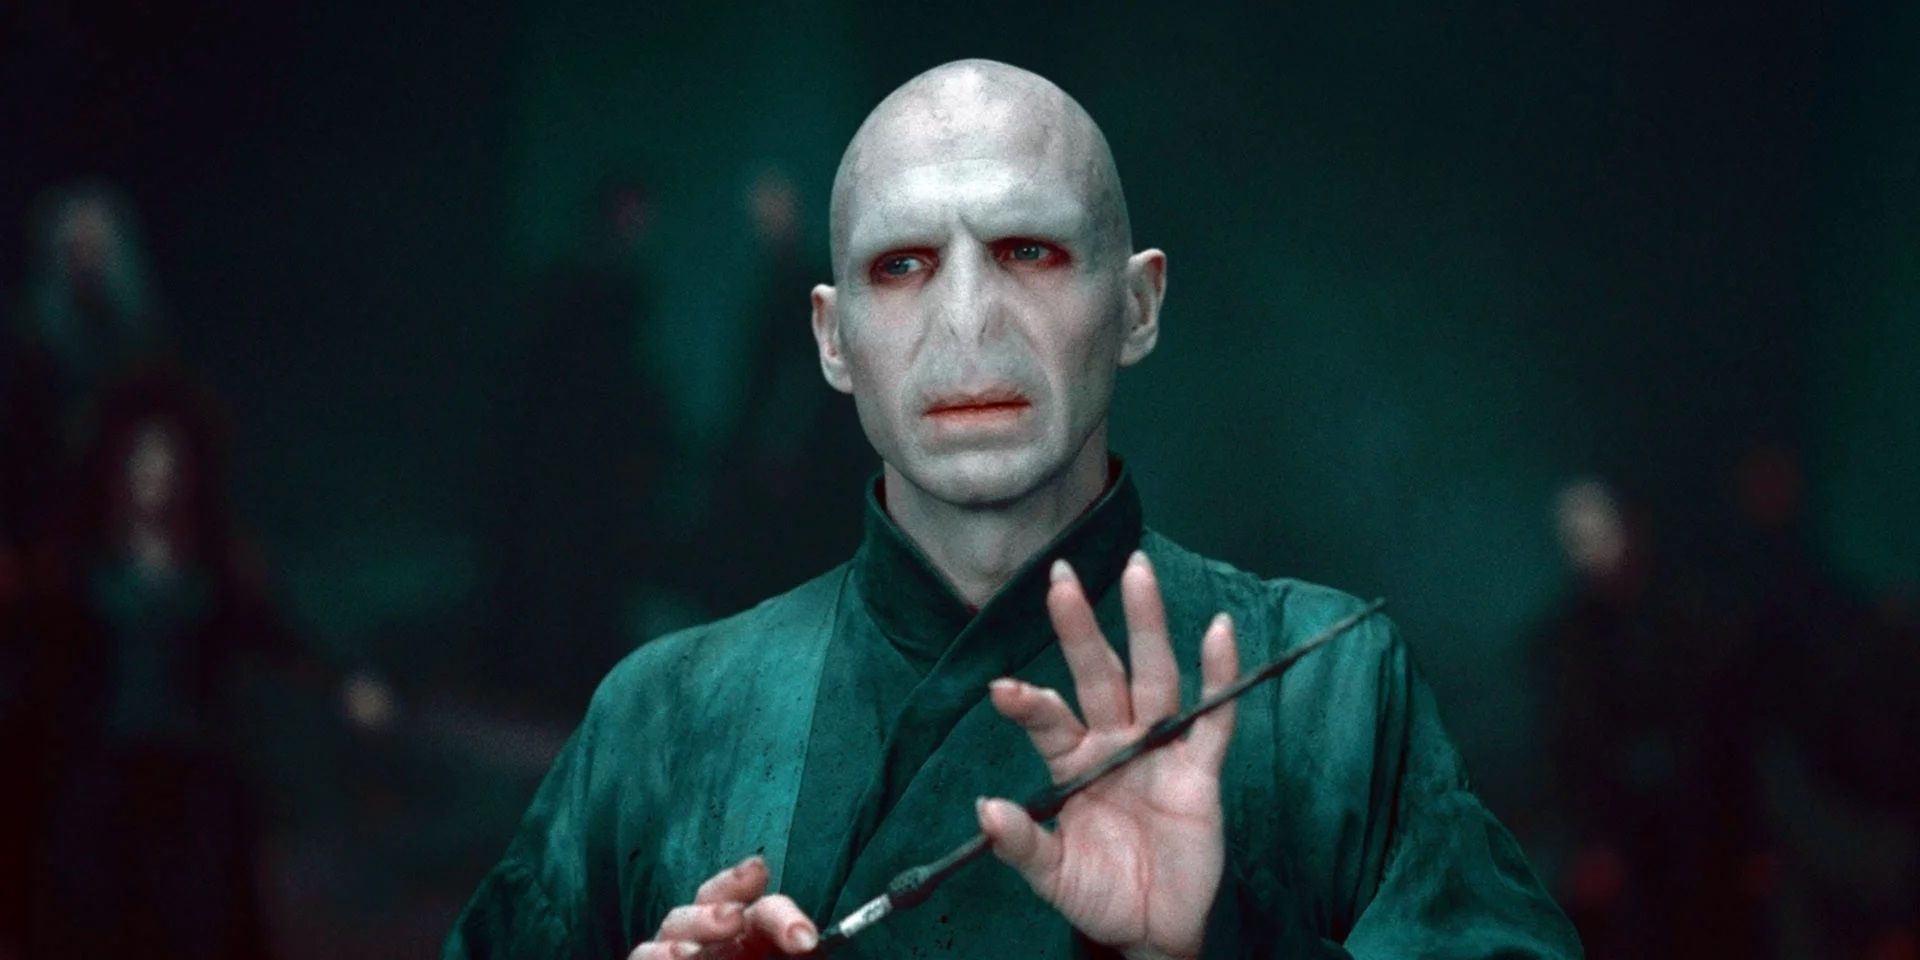 Voldemort playing with the Elder Wand in Harry Potter and the Deathly Hallows Part 2